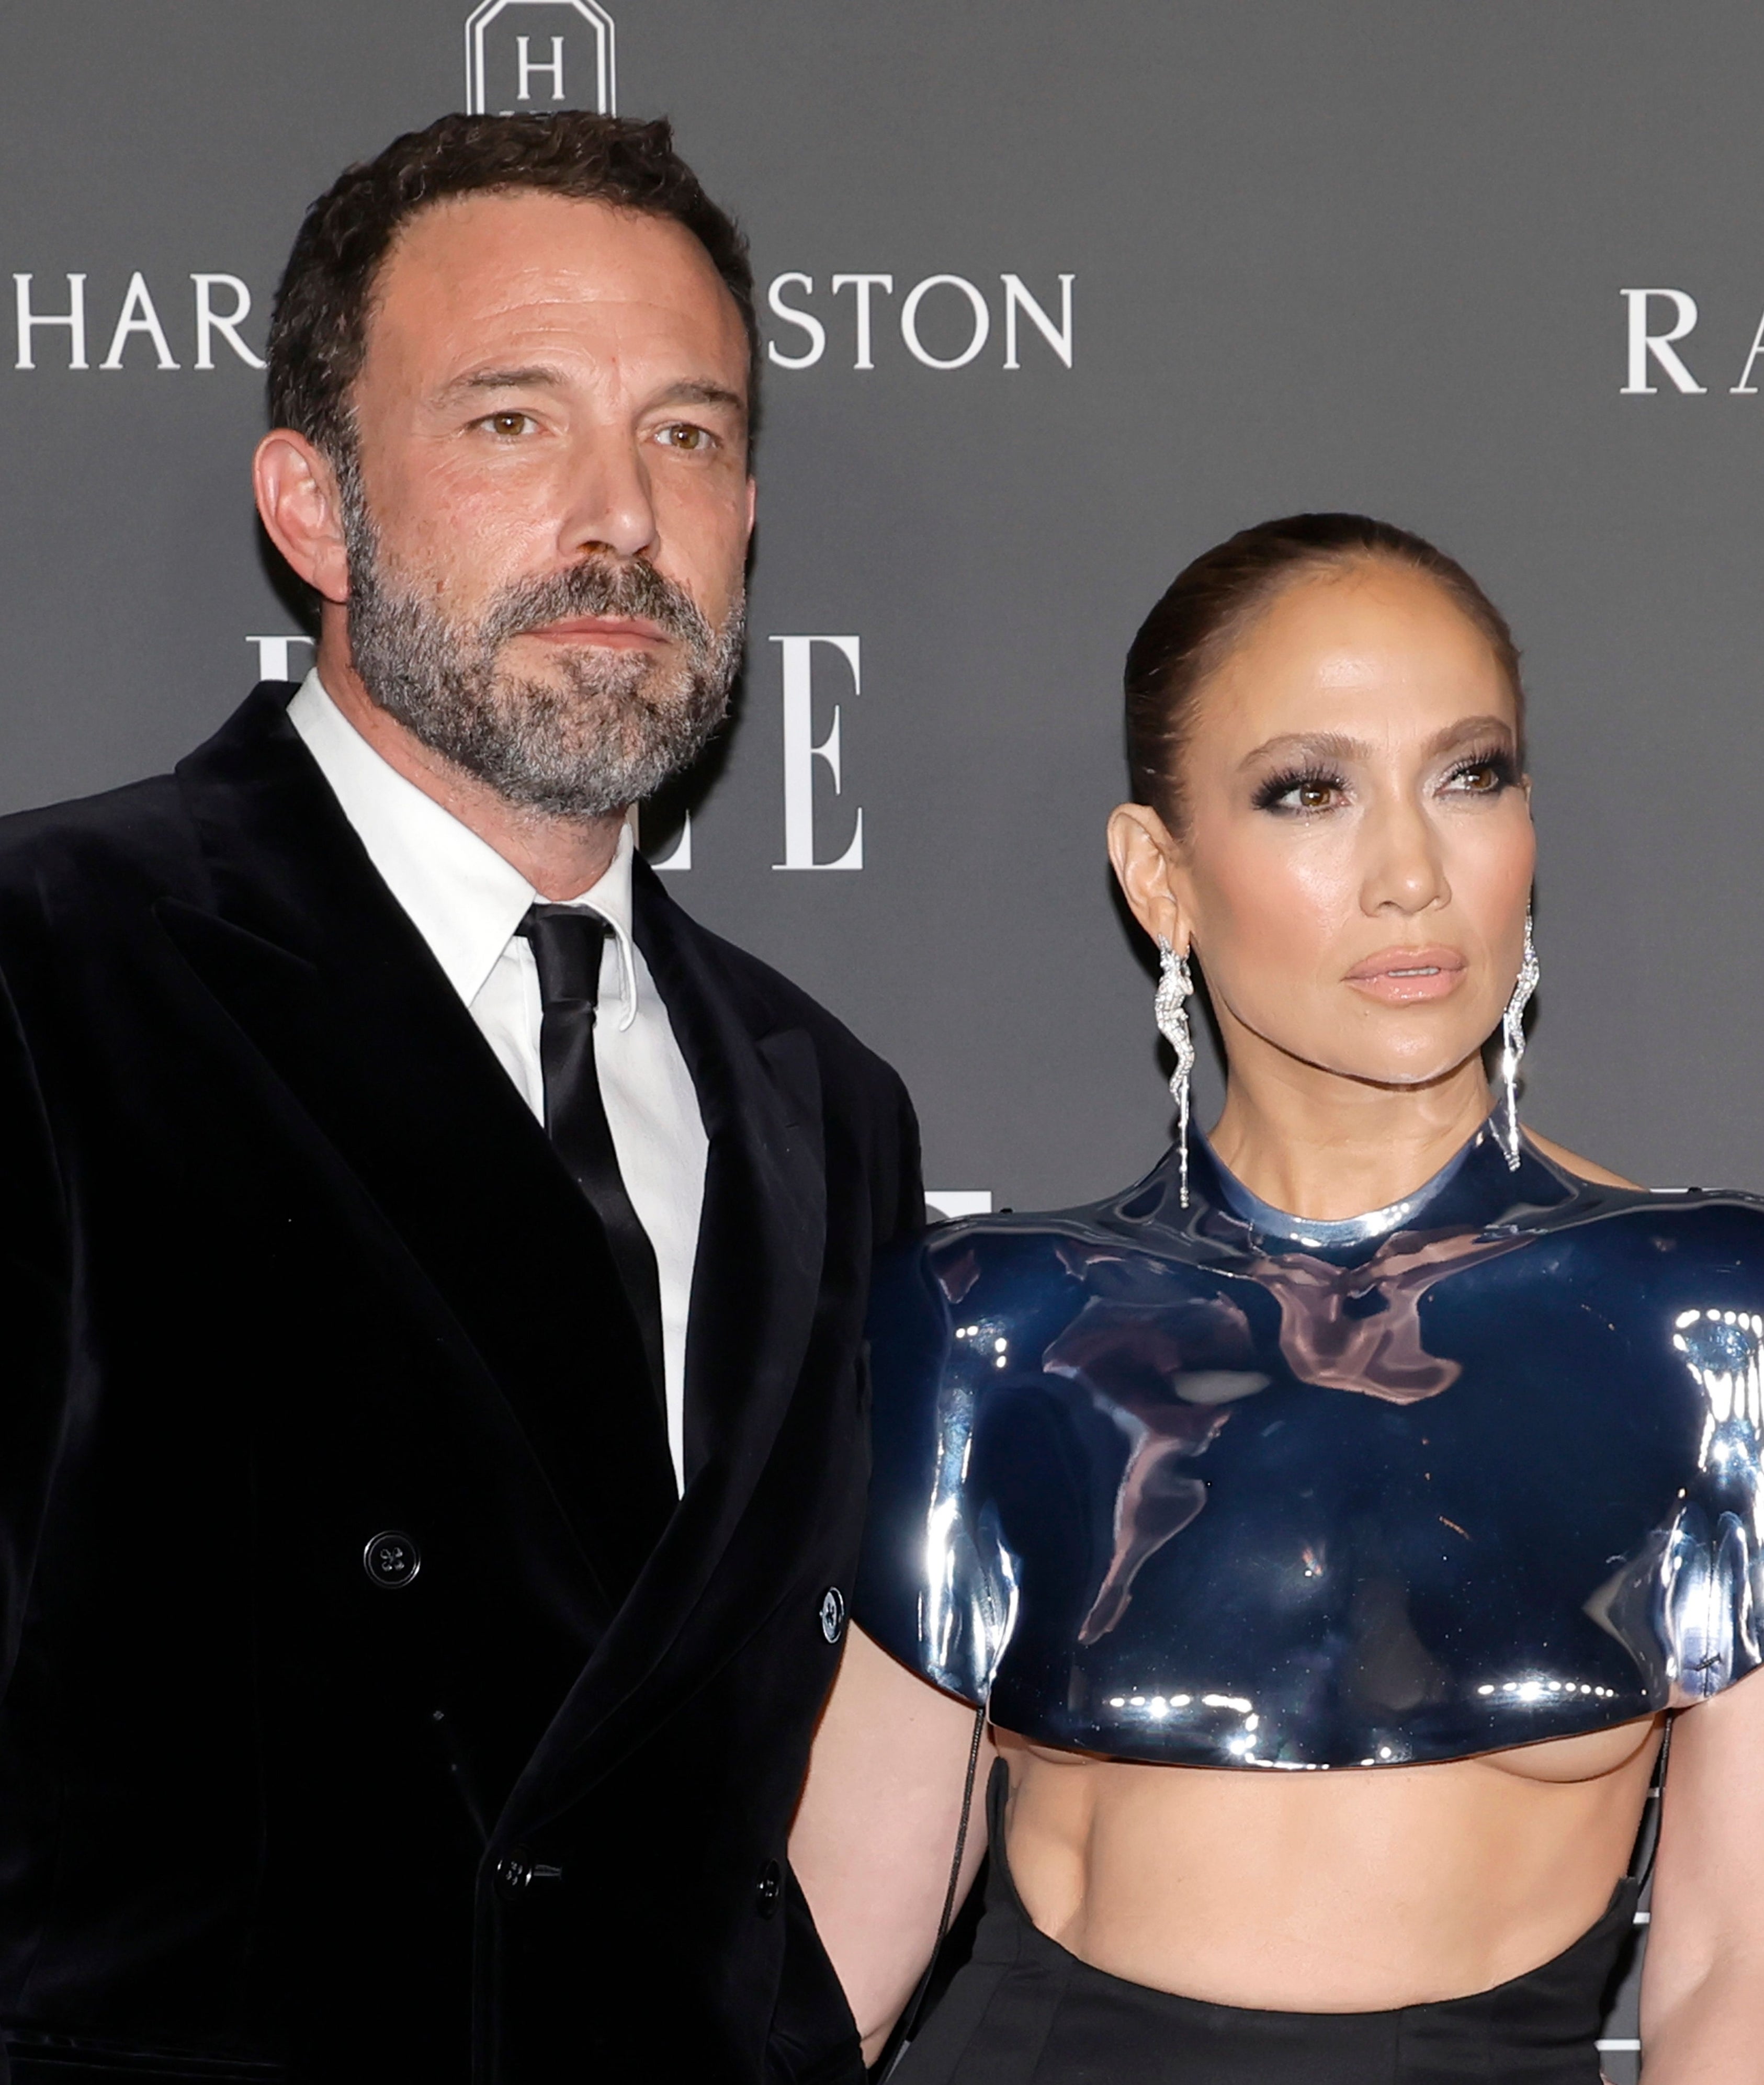 Ben Affleck and Jennifer Lopez posing together; he in a black suit, she in a metallic crop top